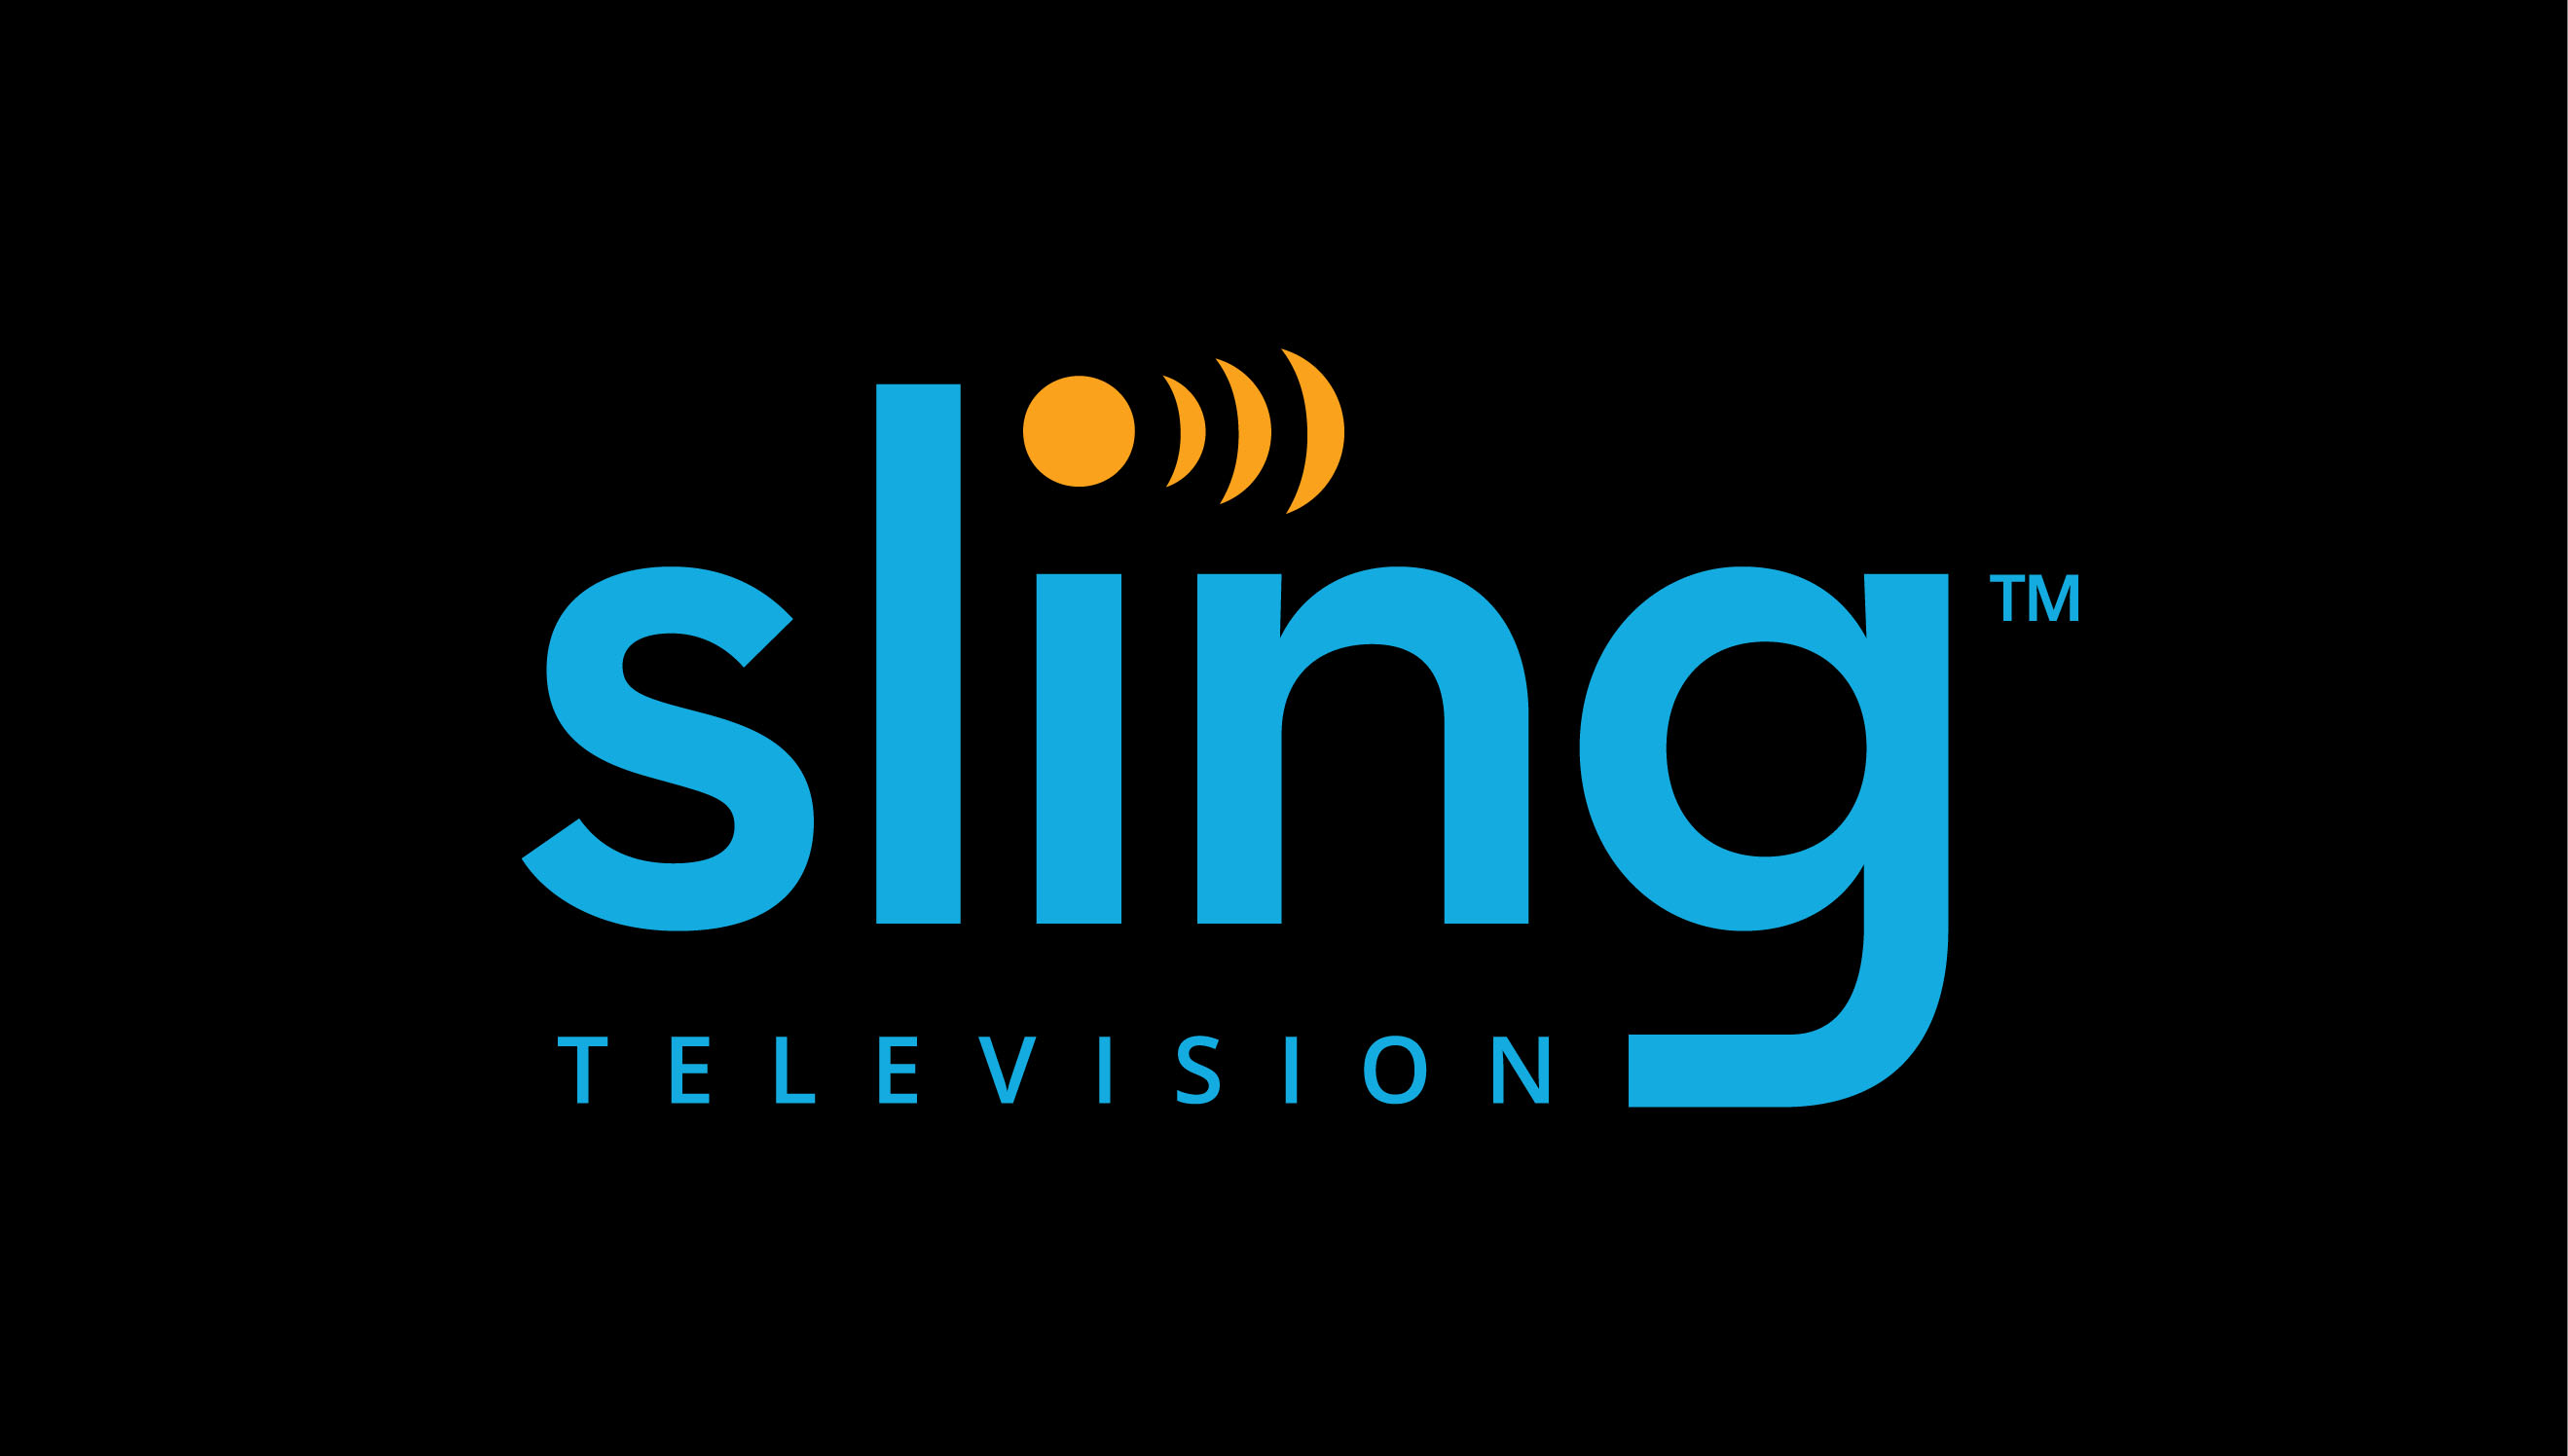 How to Watch Sling TV Online (Easy Guide 2020)